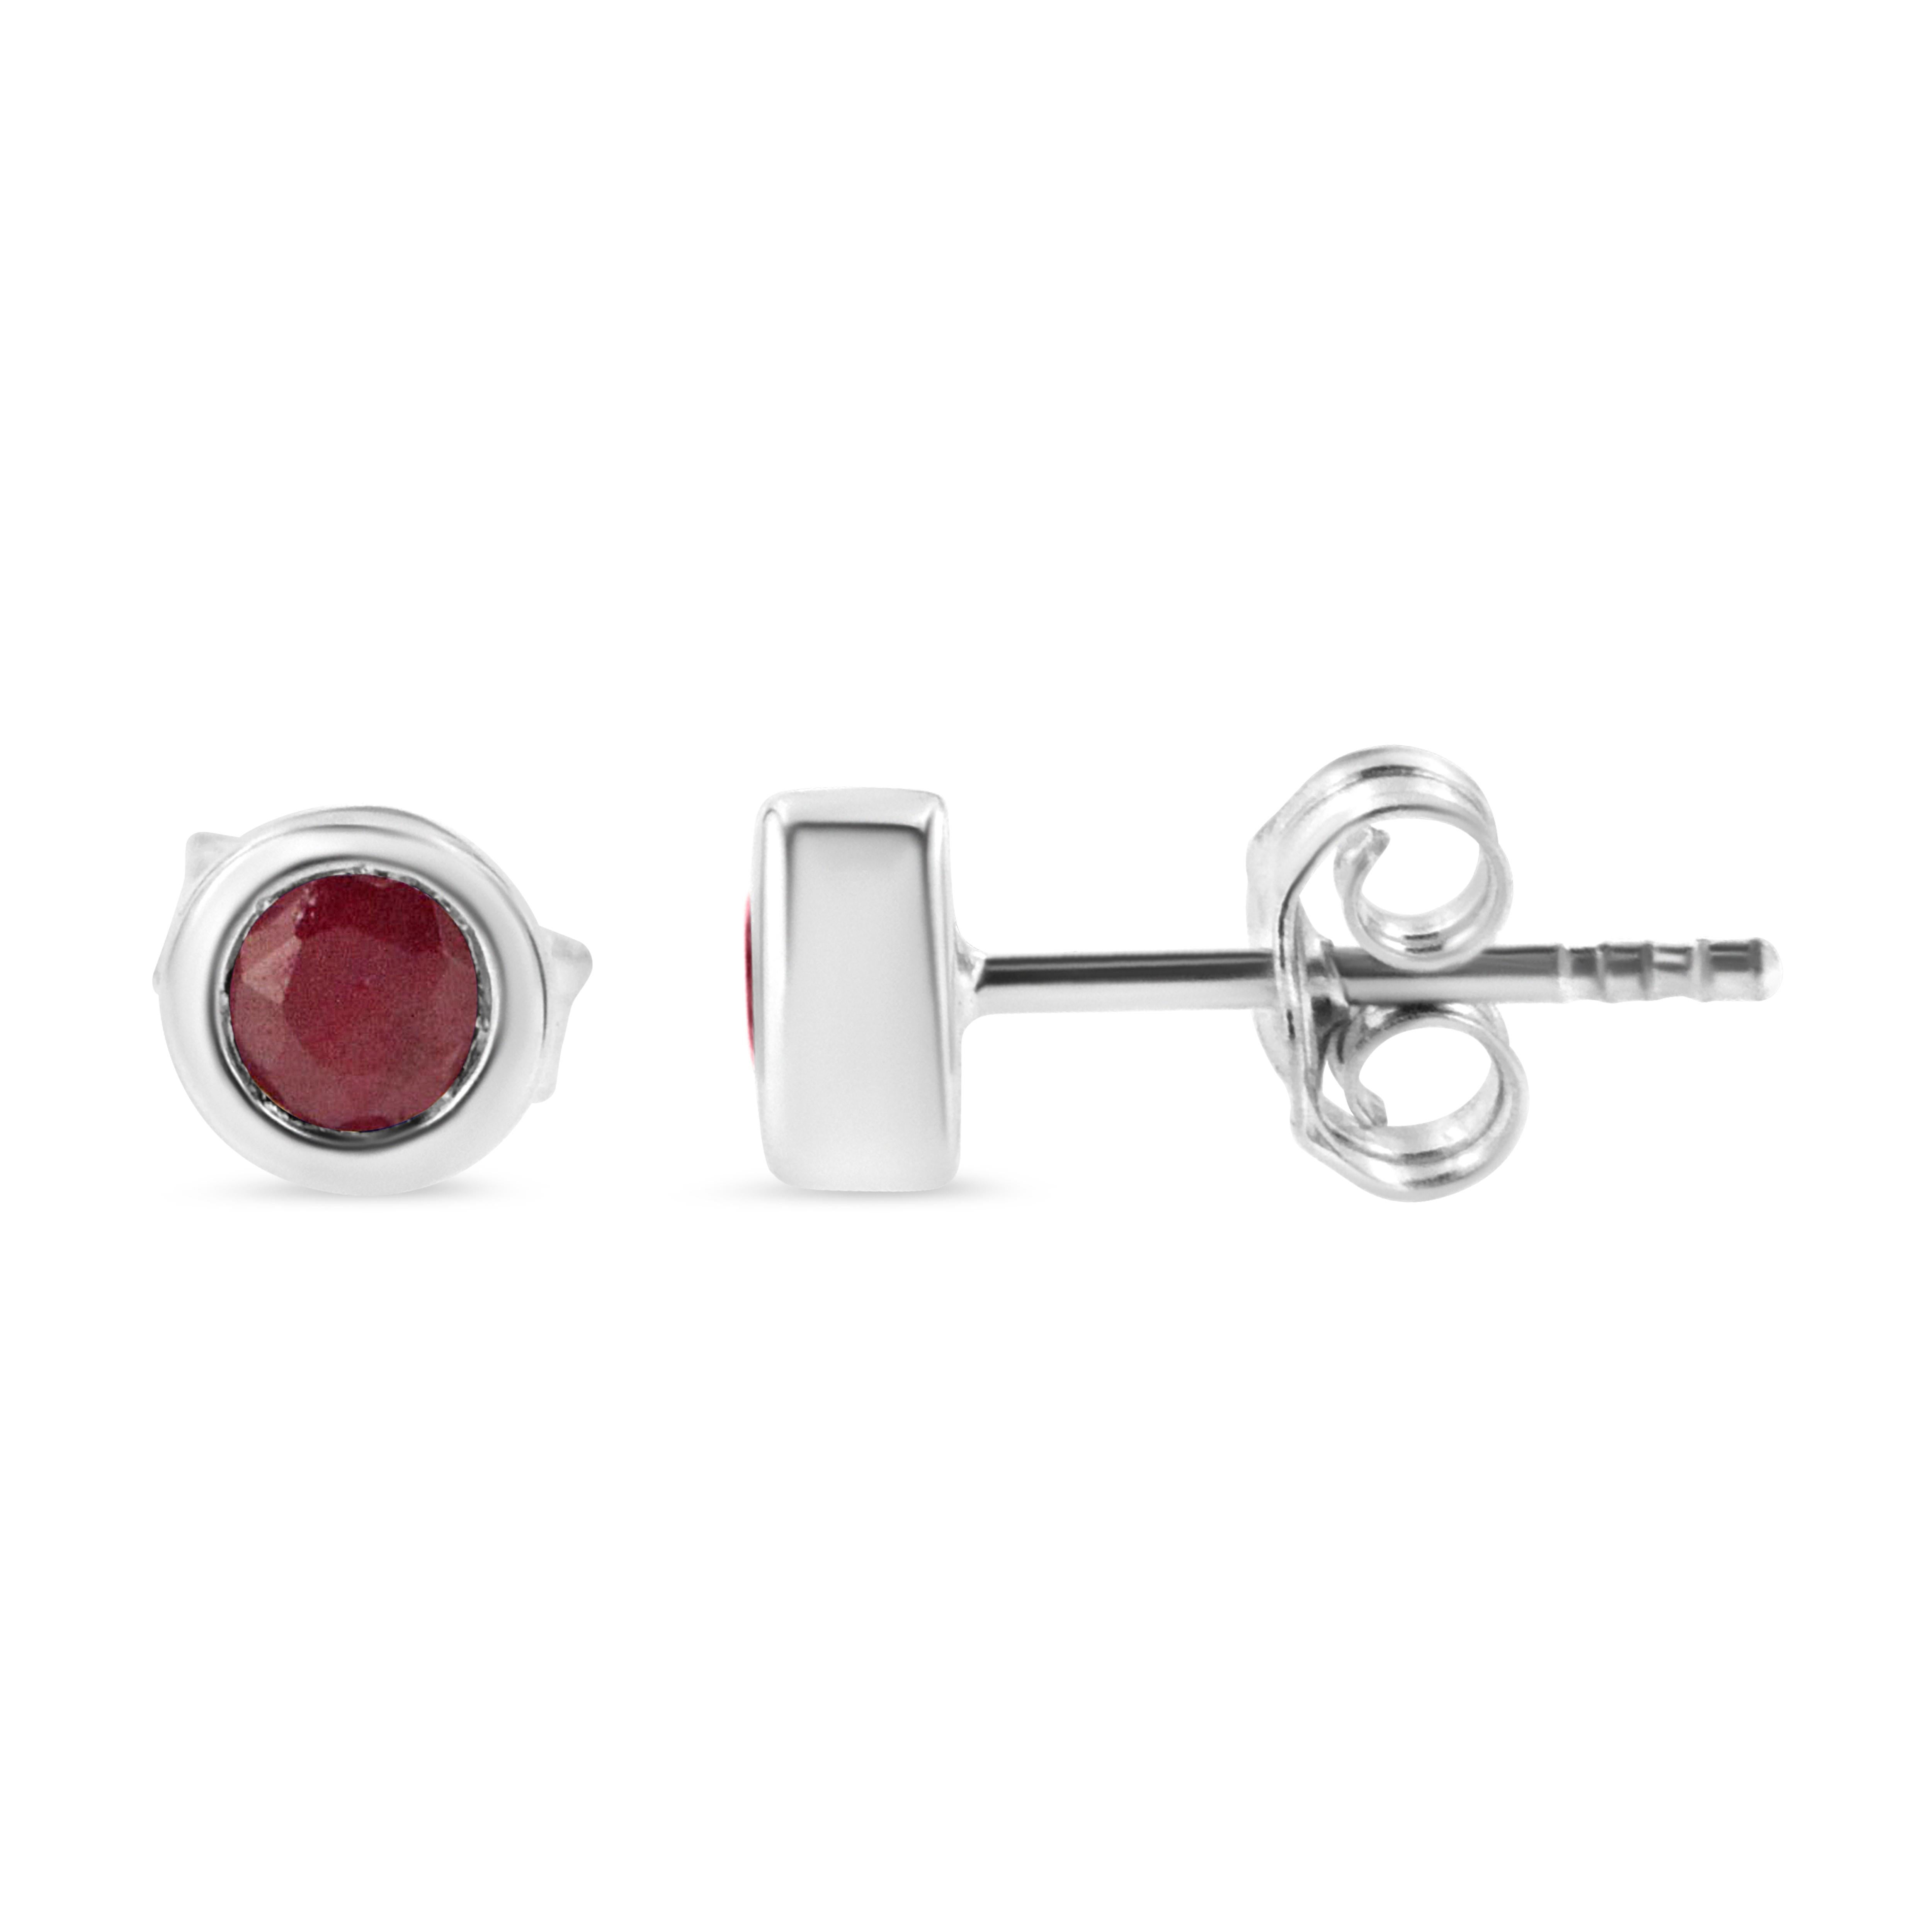 Striking and timeless, these stunning .925 sterling silver solitaire stud earrings feature bold garnet gemstones in a bezel setting. The gemstones are 3.5mm and treated red in color. The notched posts and friction backs keep these pierced earrings